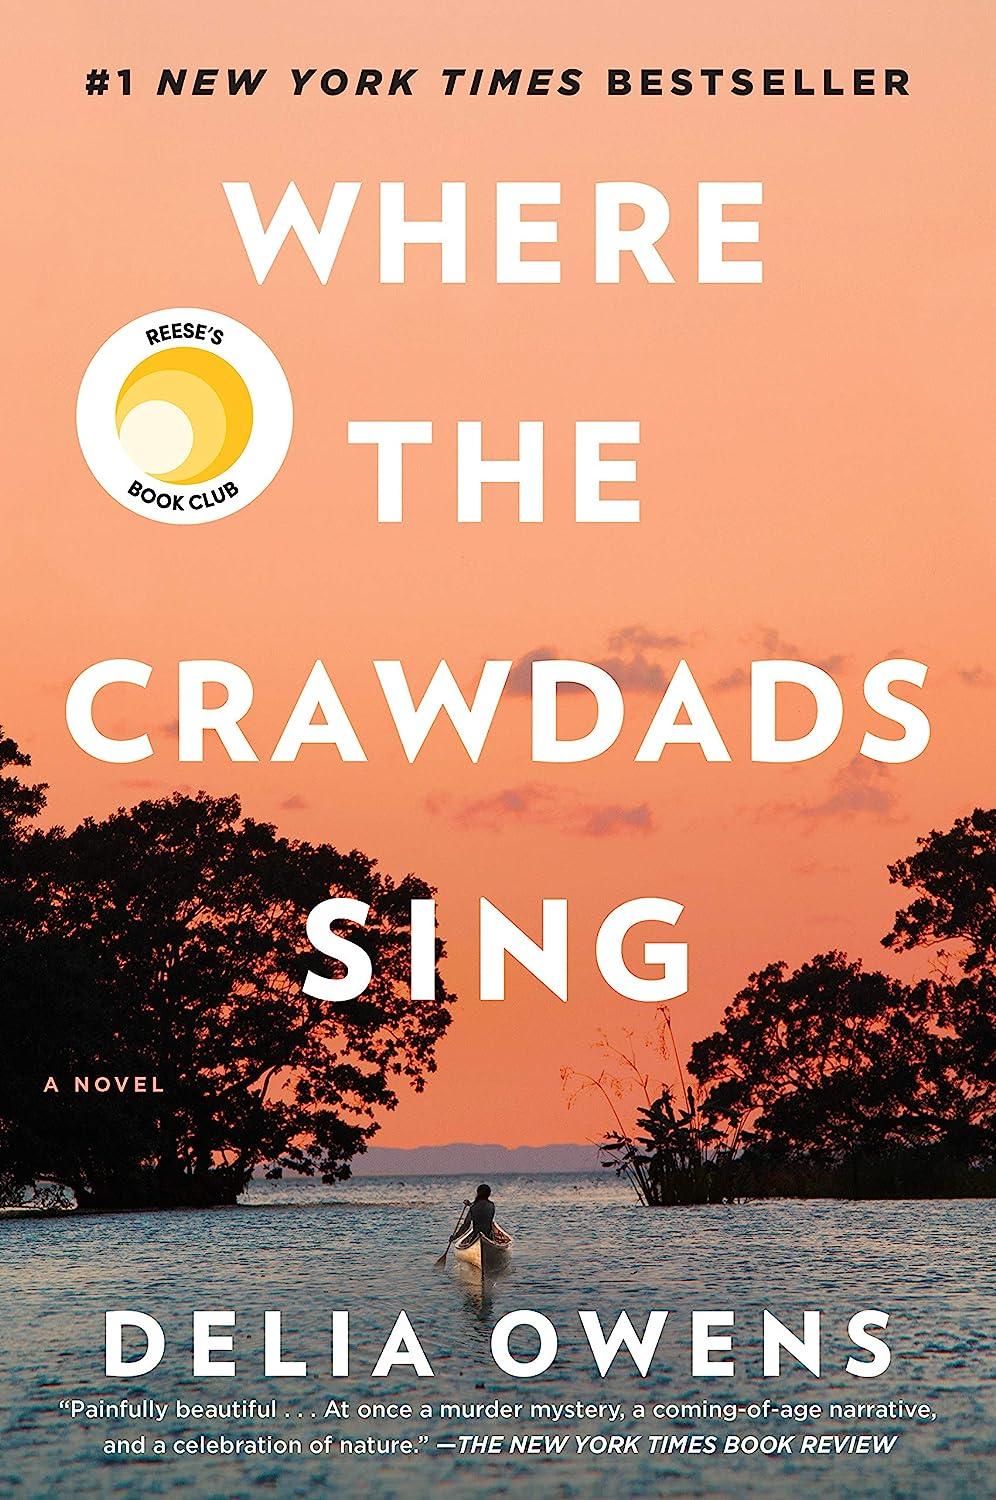 where the crawdads sing 1st edition delia owens 978-0735219090